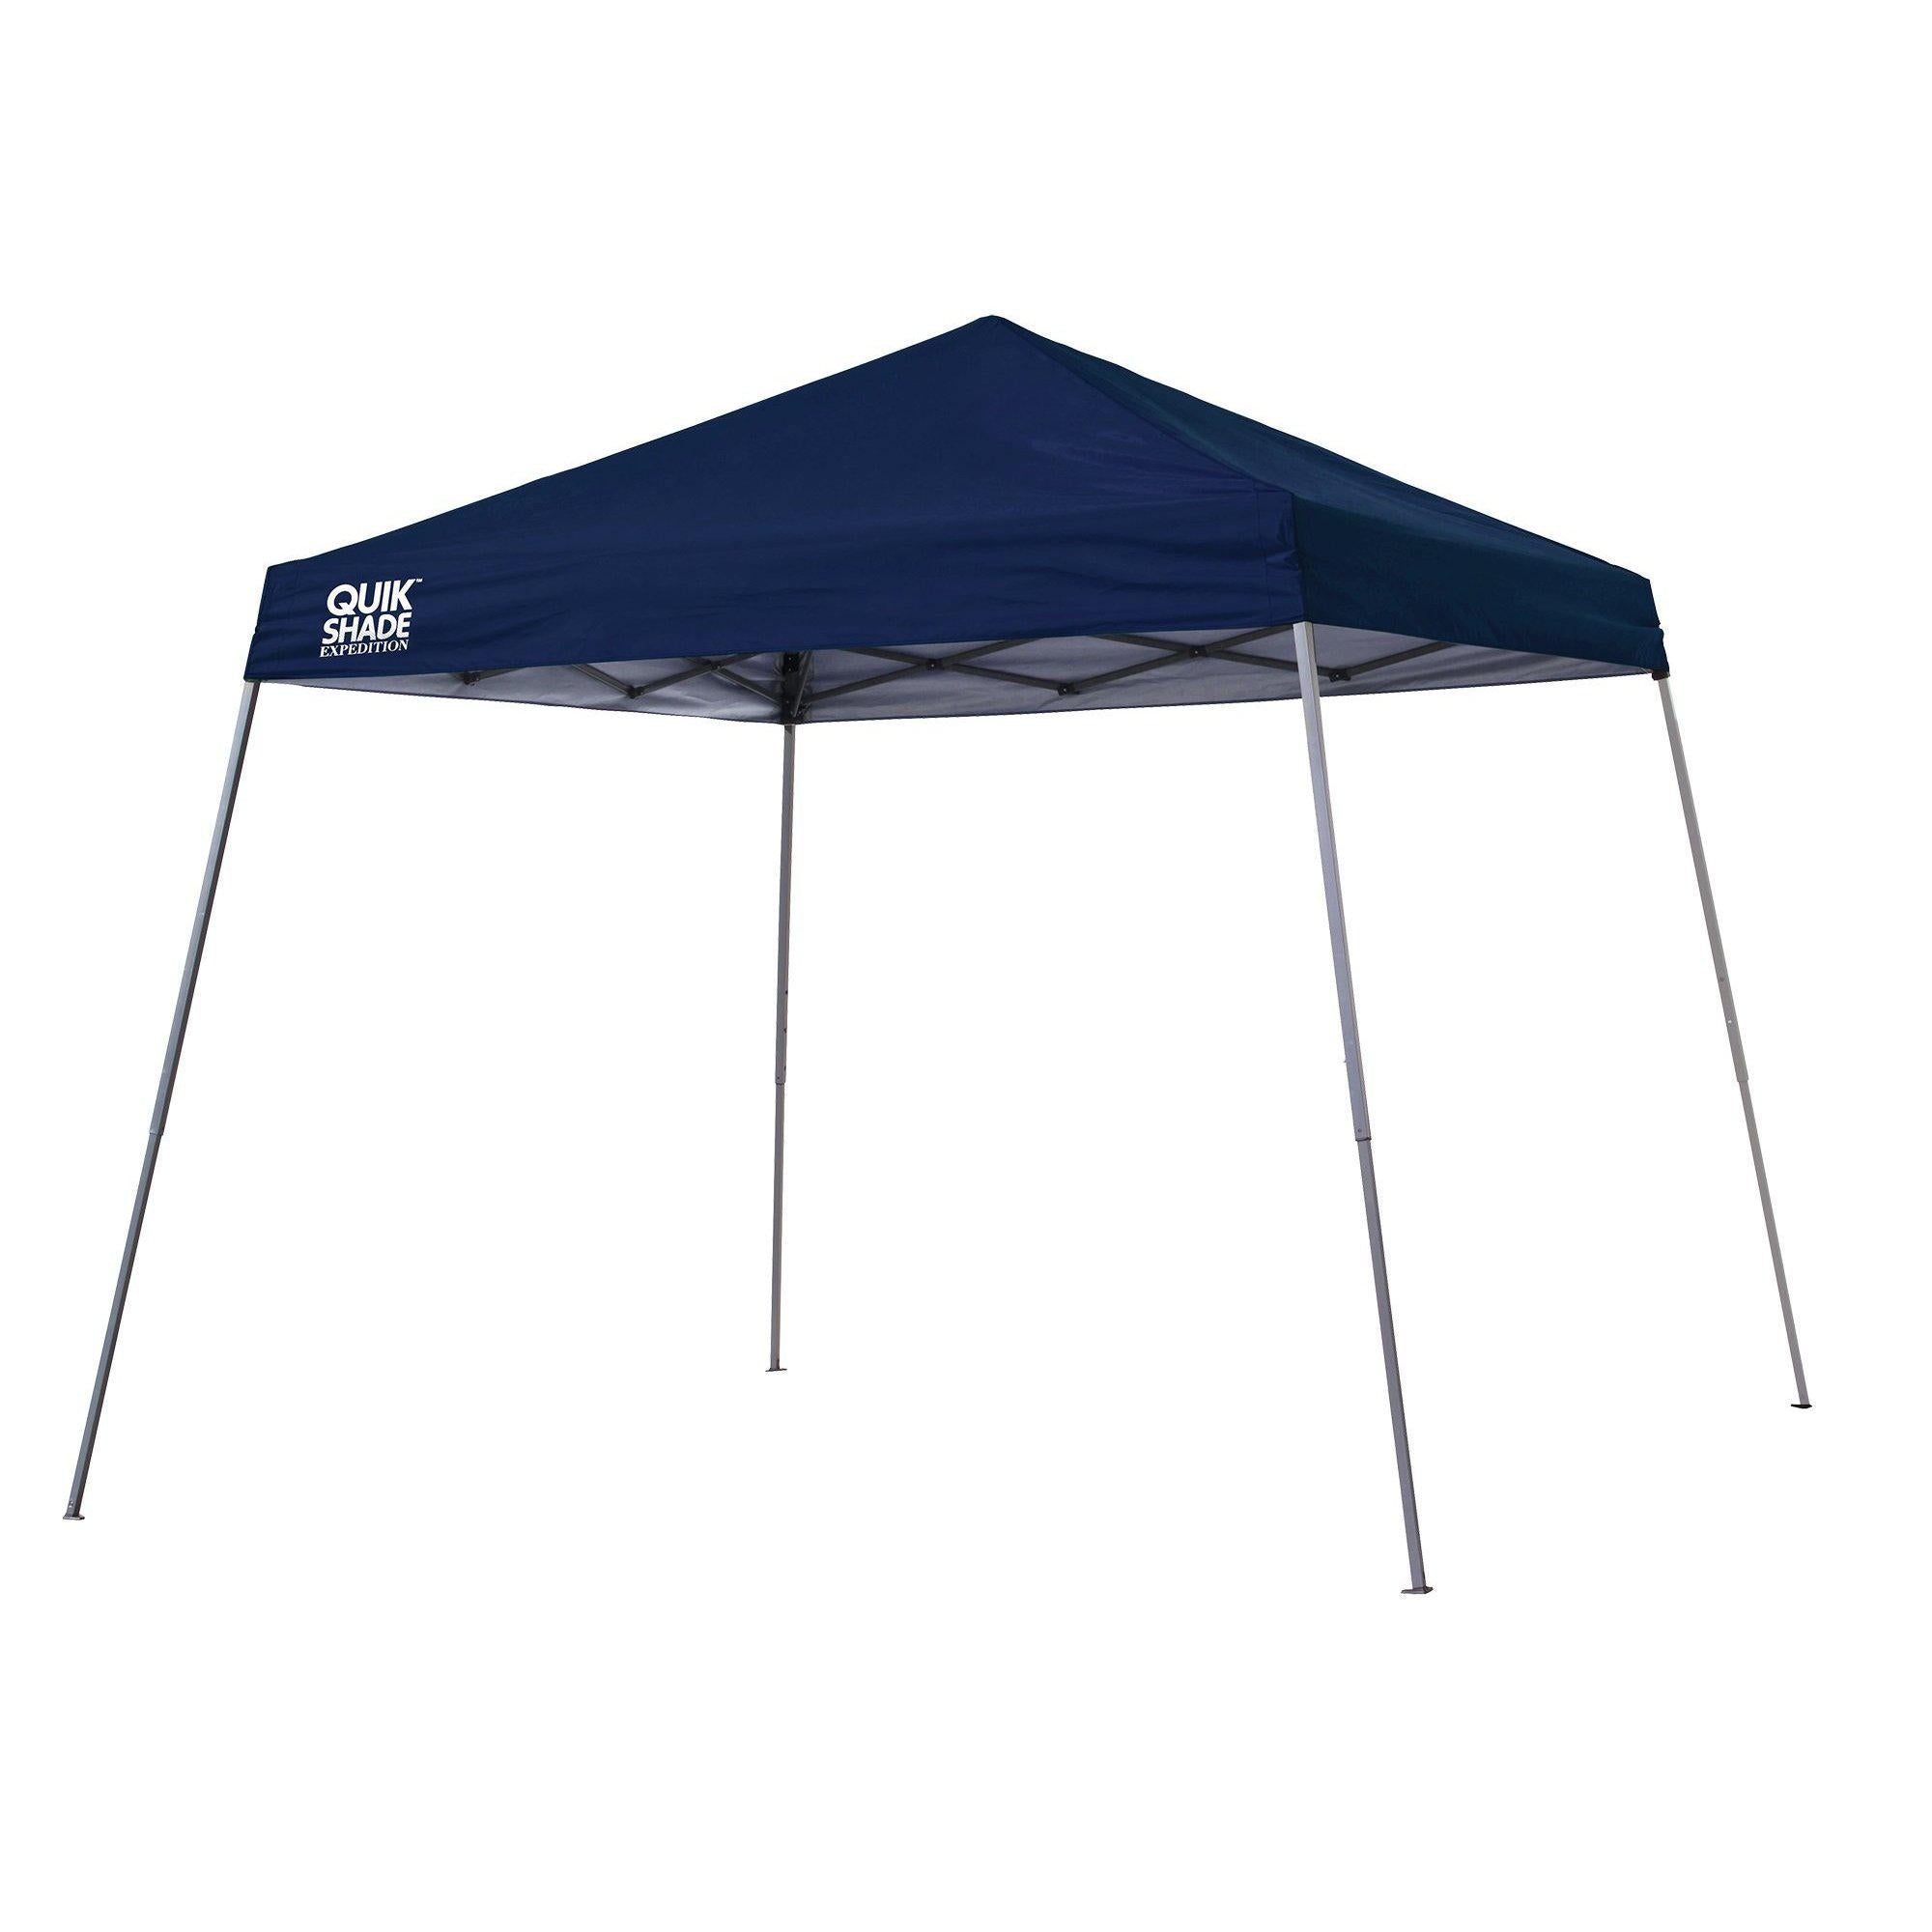 Quik Shade Expedition 12 x 12 ft. Slant Leg Canopy